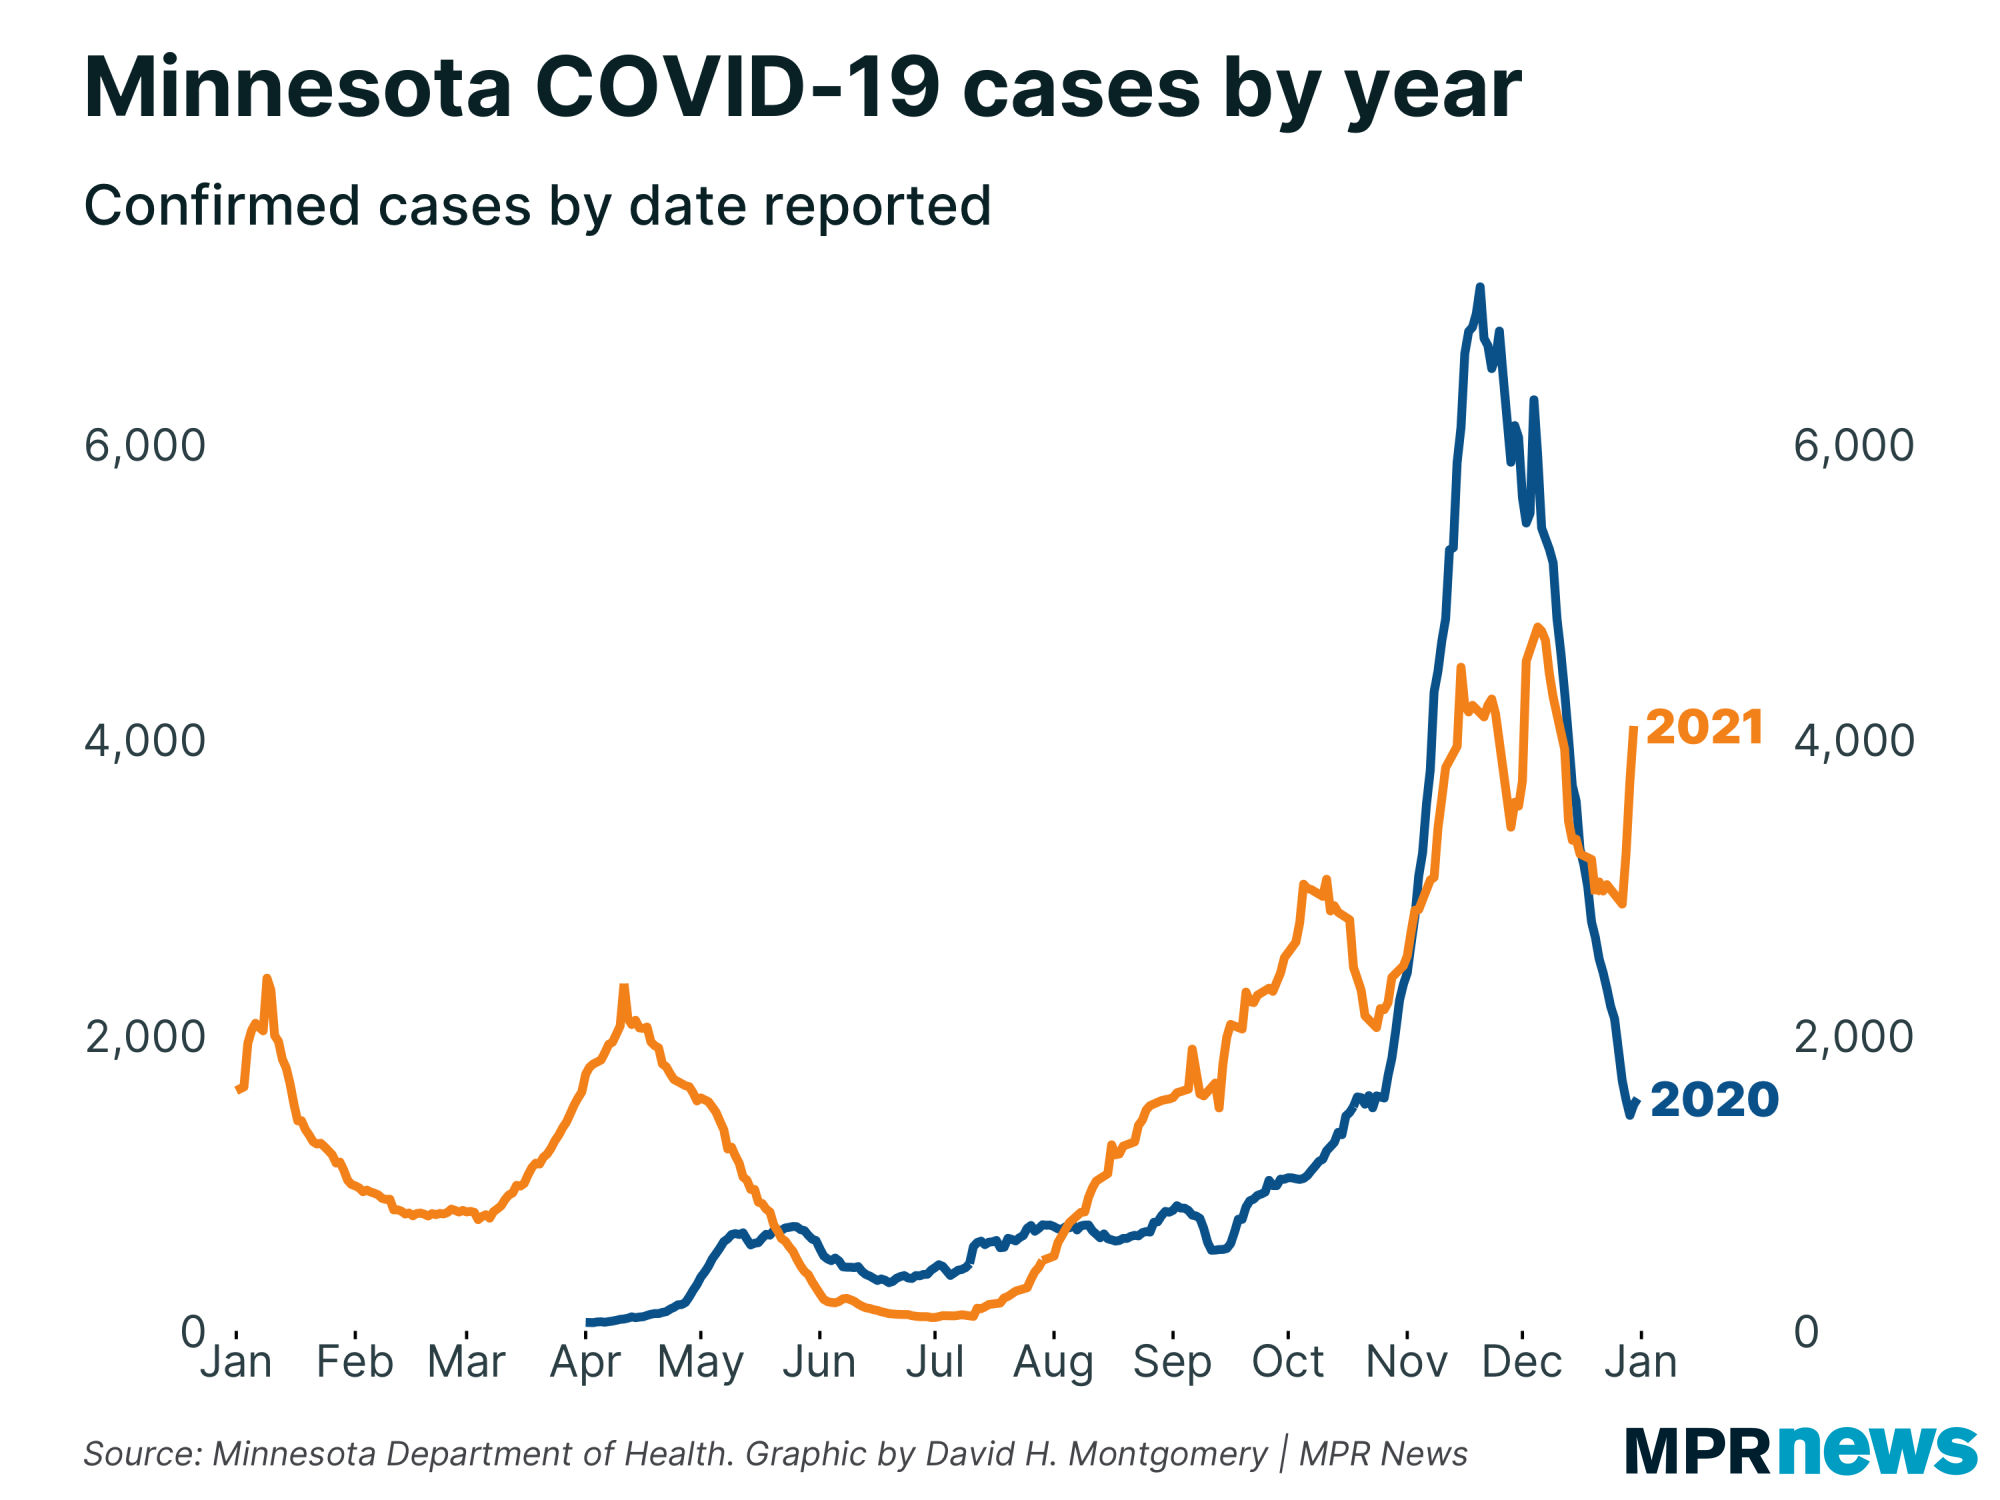 Graph of Minnesota's COVID-19 cases by year